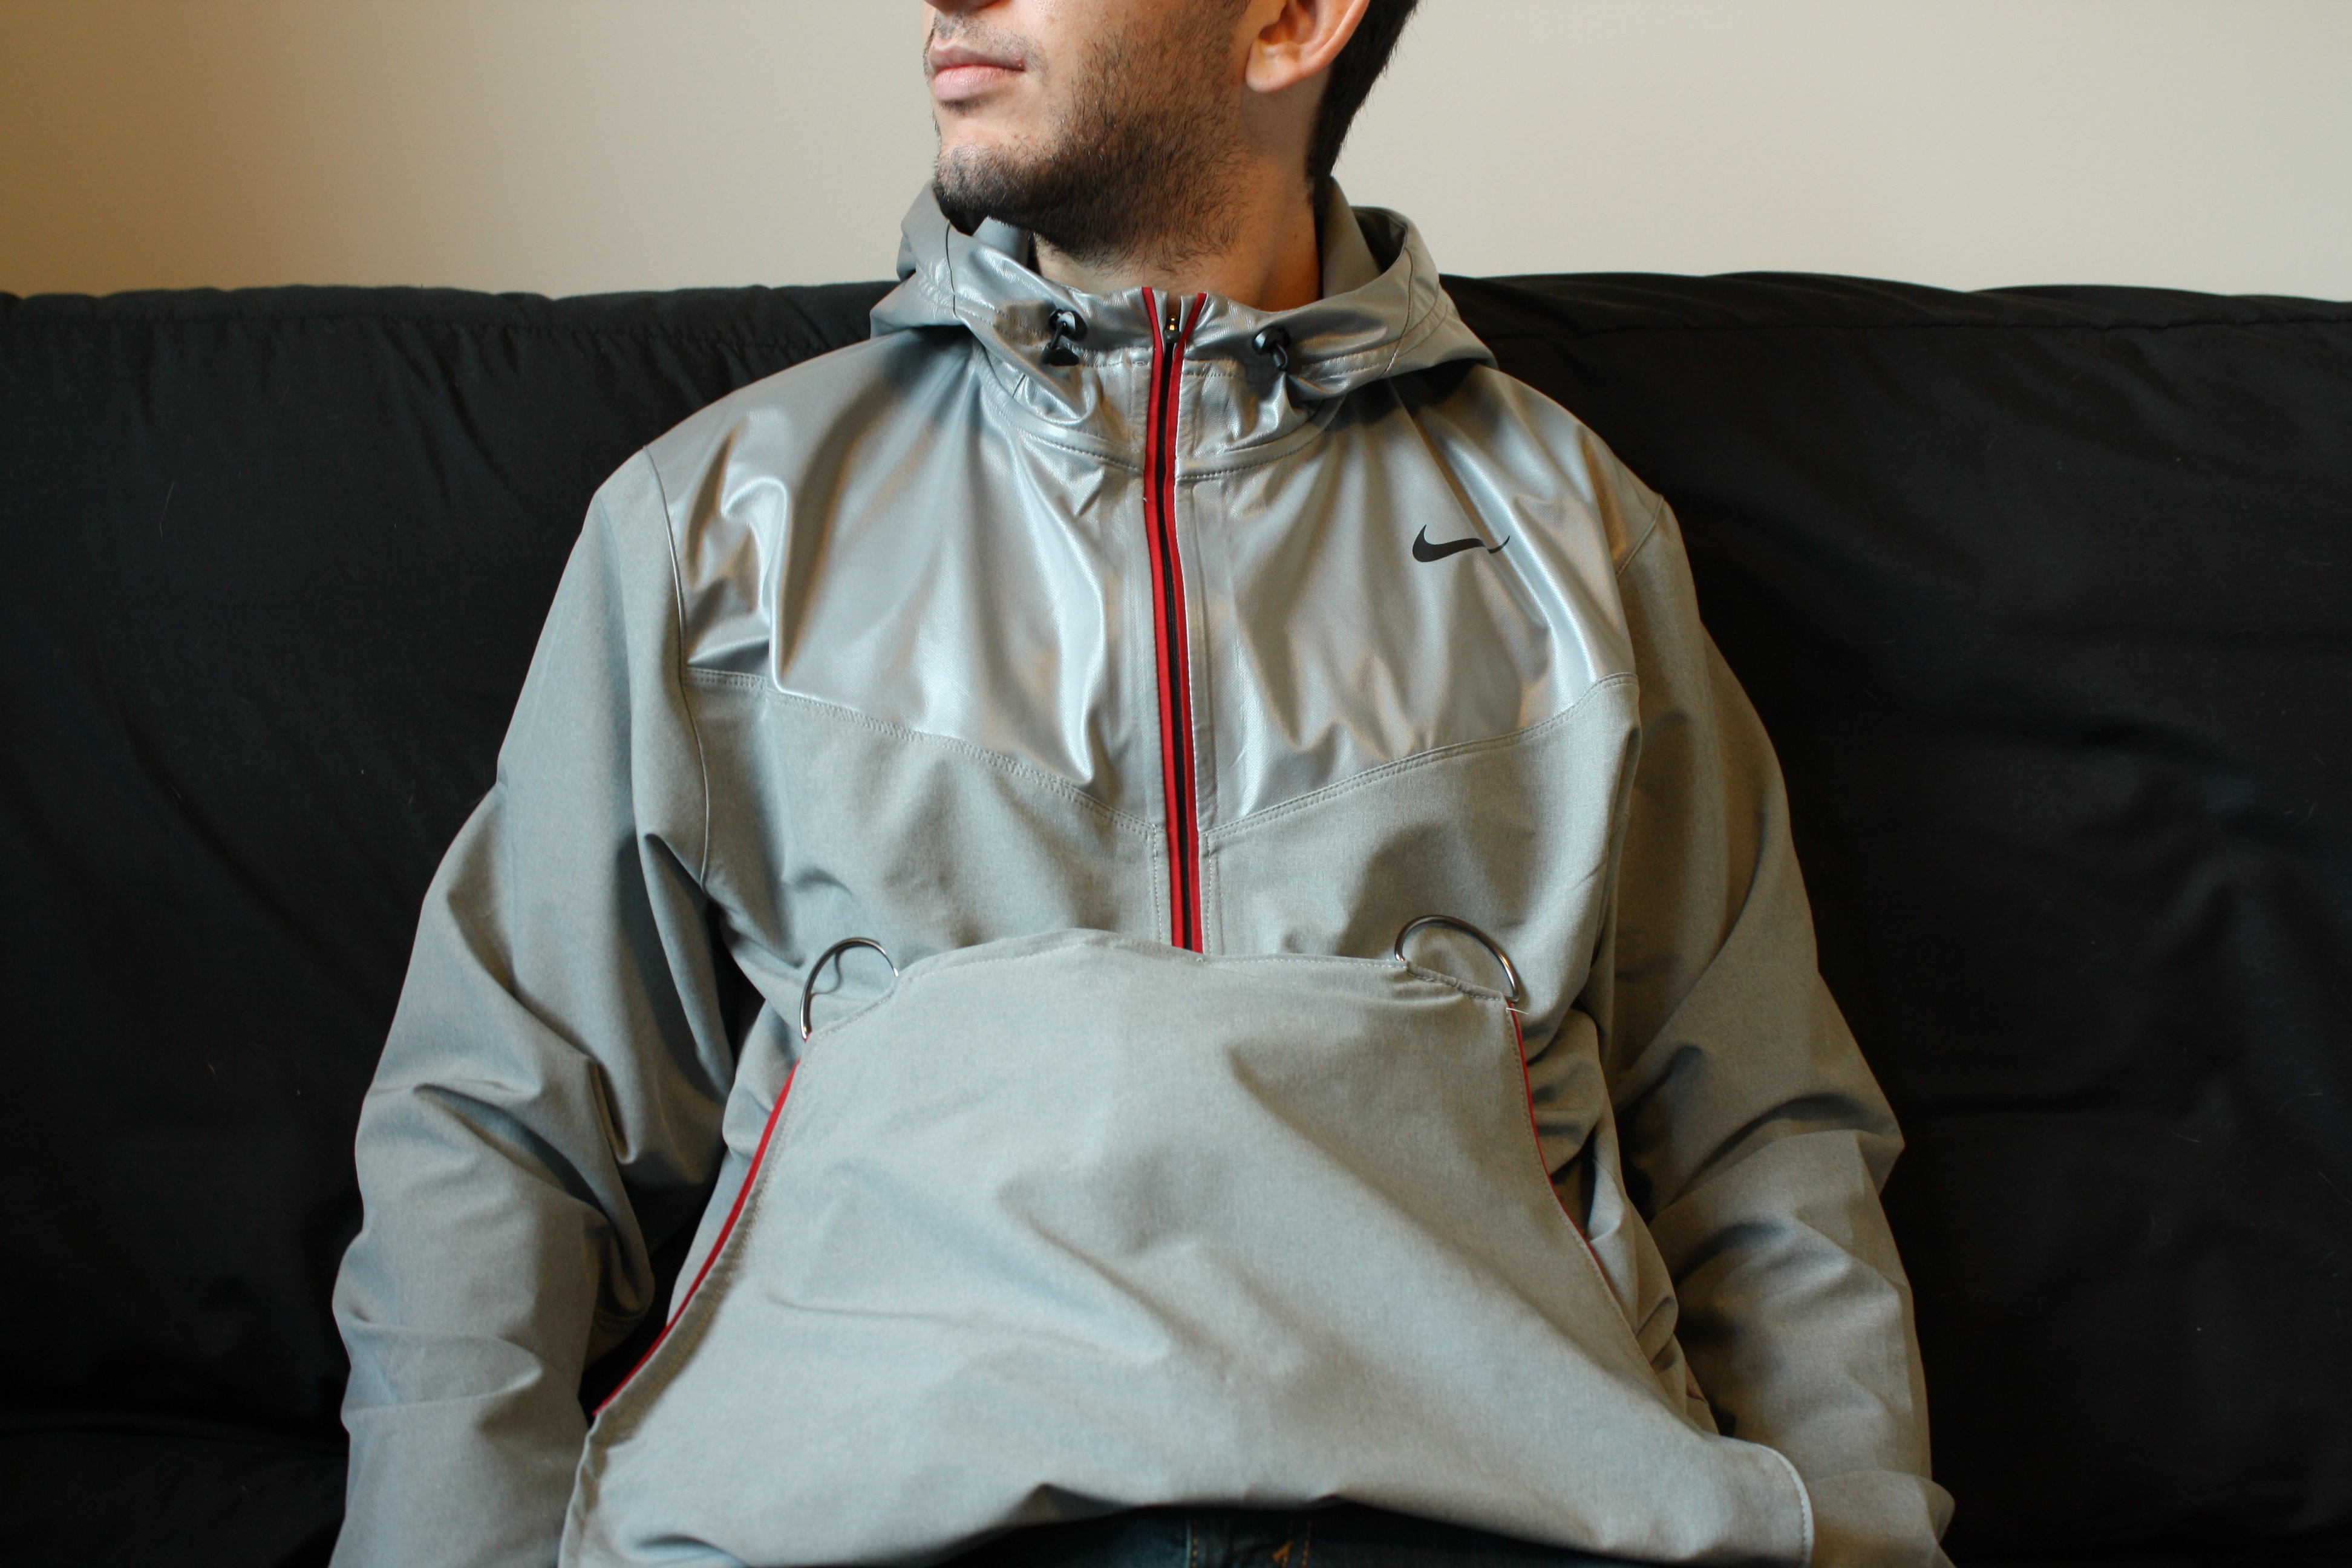 The RAYN jacket on a young man, seated. It's an altered Nike gray sports jacket with hoodie and zipper, but it's been radically customized in ways that are invisible at first glance.